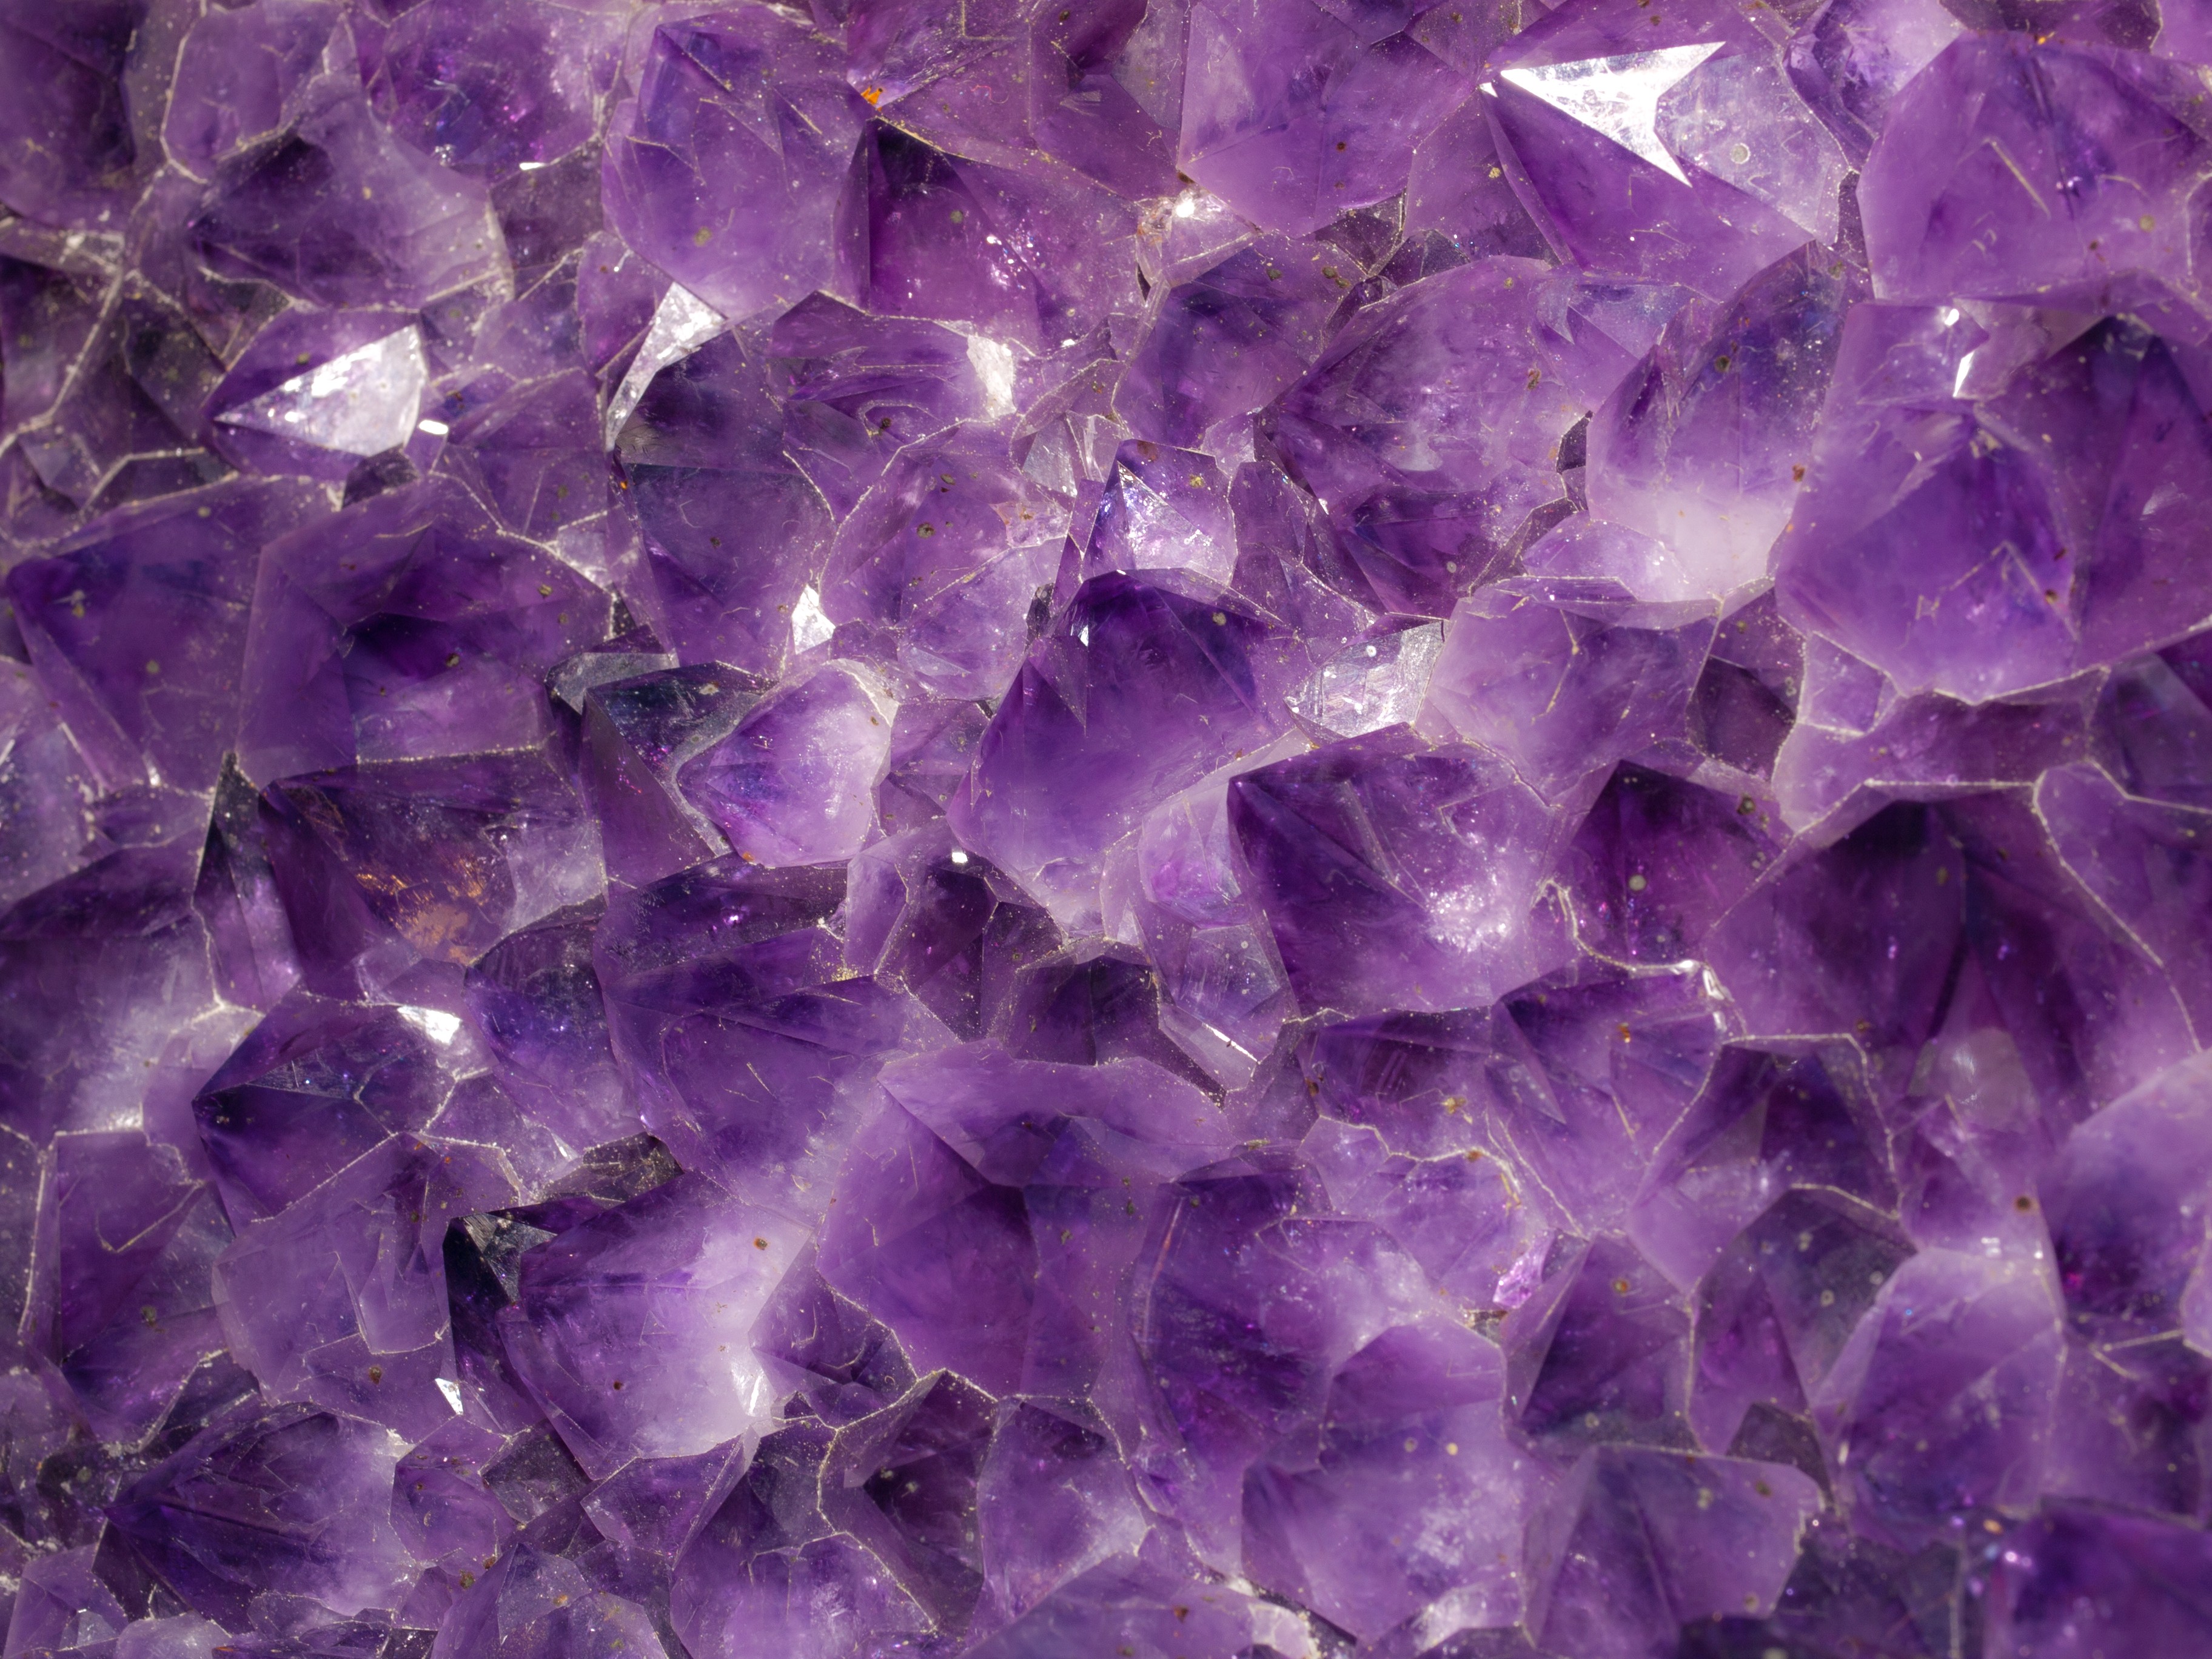 http://en.wikipedia.org/wiki/File:Amethyst_gem_stone_texture_wwarby_flickr.jpg http://creativecommons.org/licenses/by/2.0/deed.en